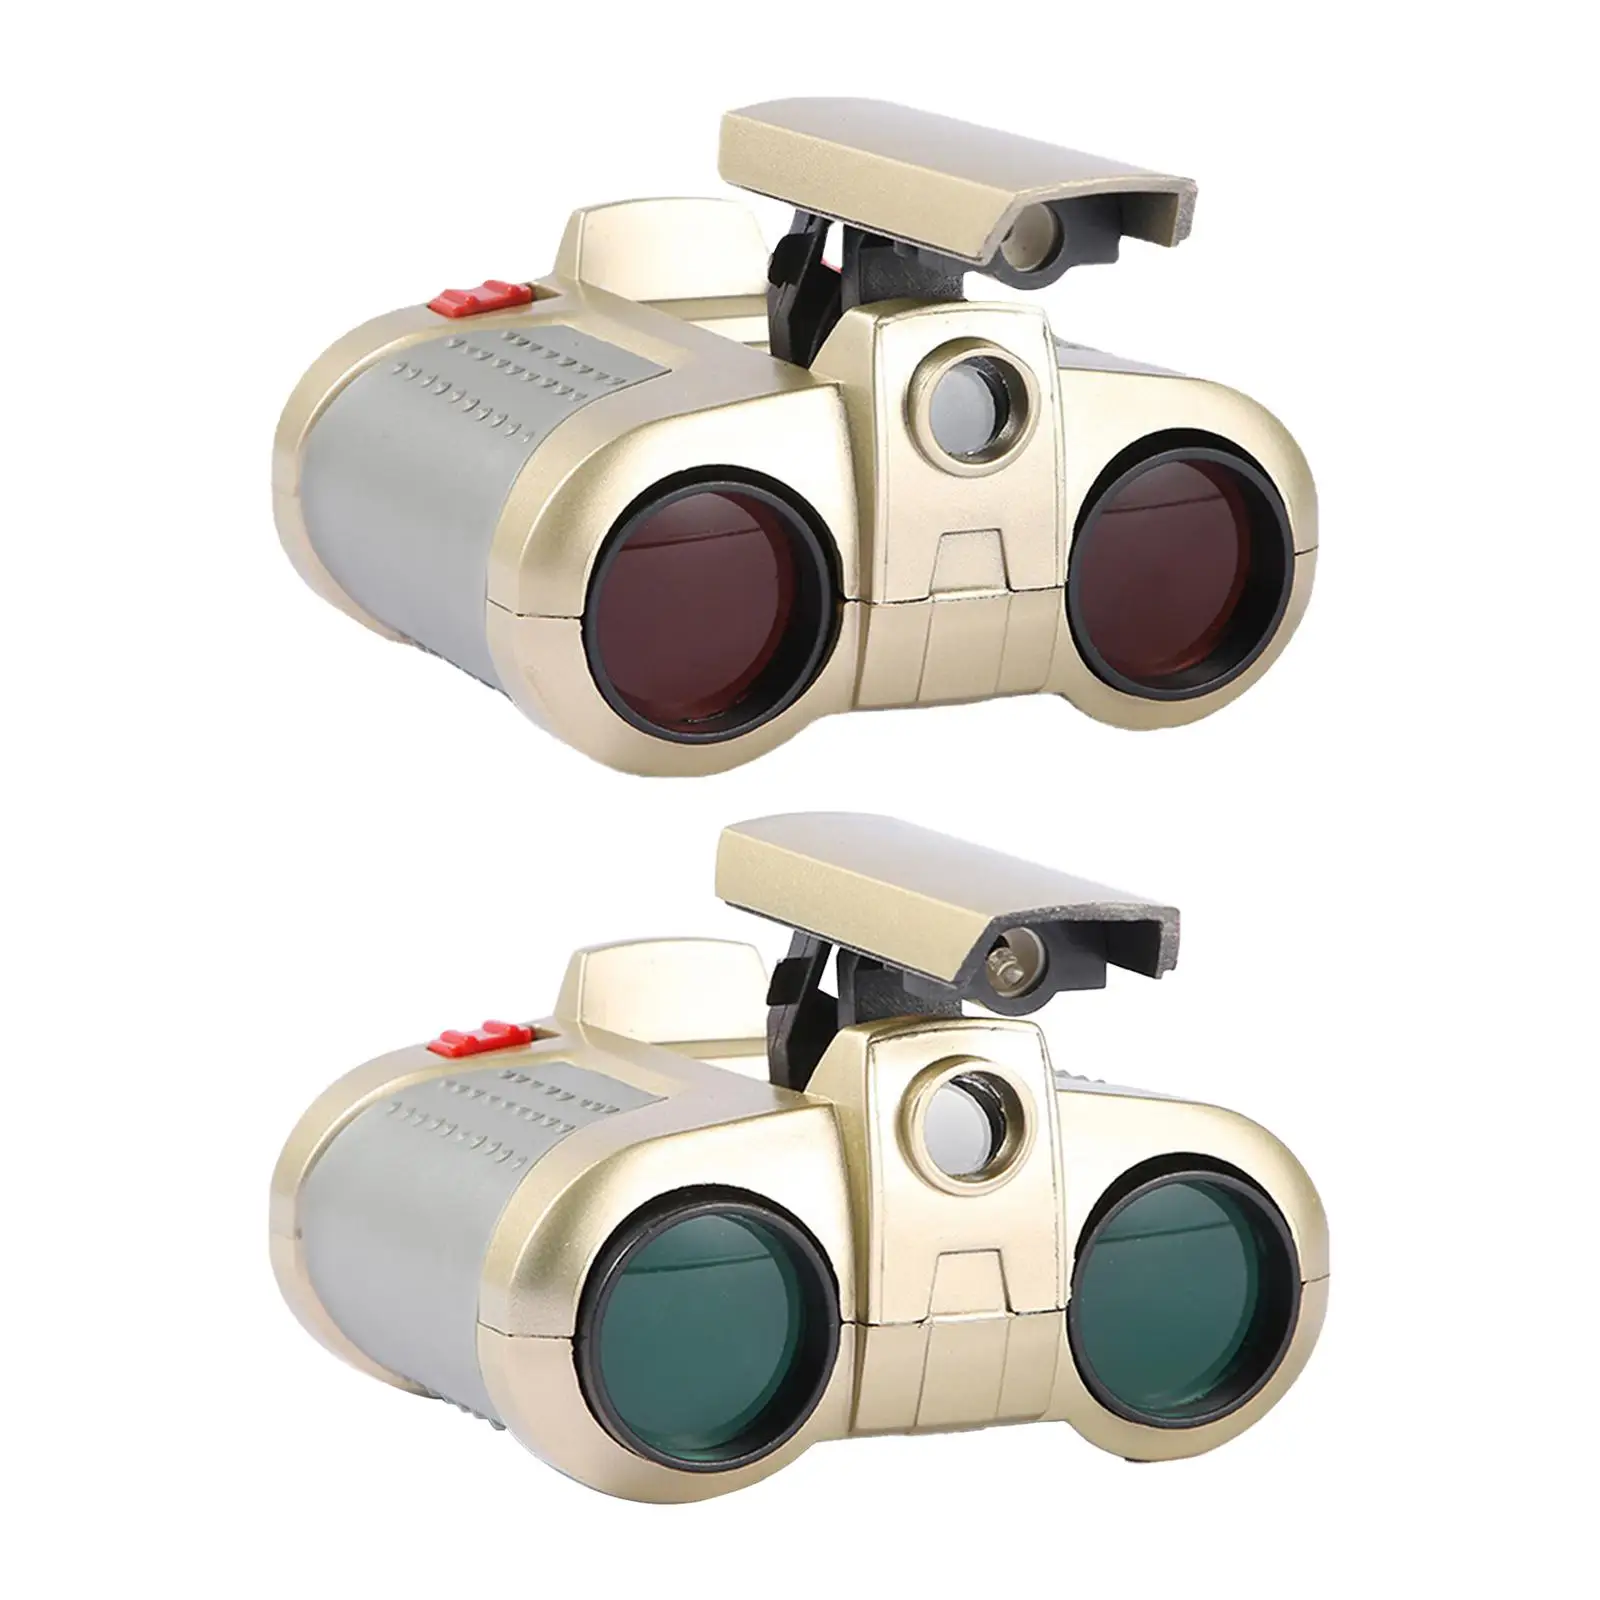 

Children's Binoculars Role Game Durable Telescope Toy for Camping Party Favors Sports Activities Outdoor Adventure Sightseeing